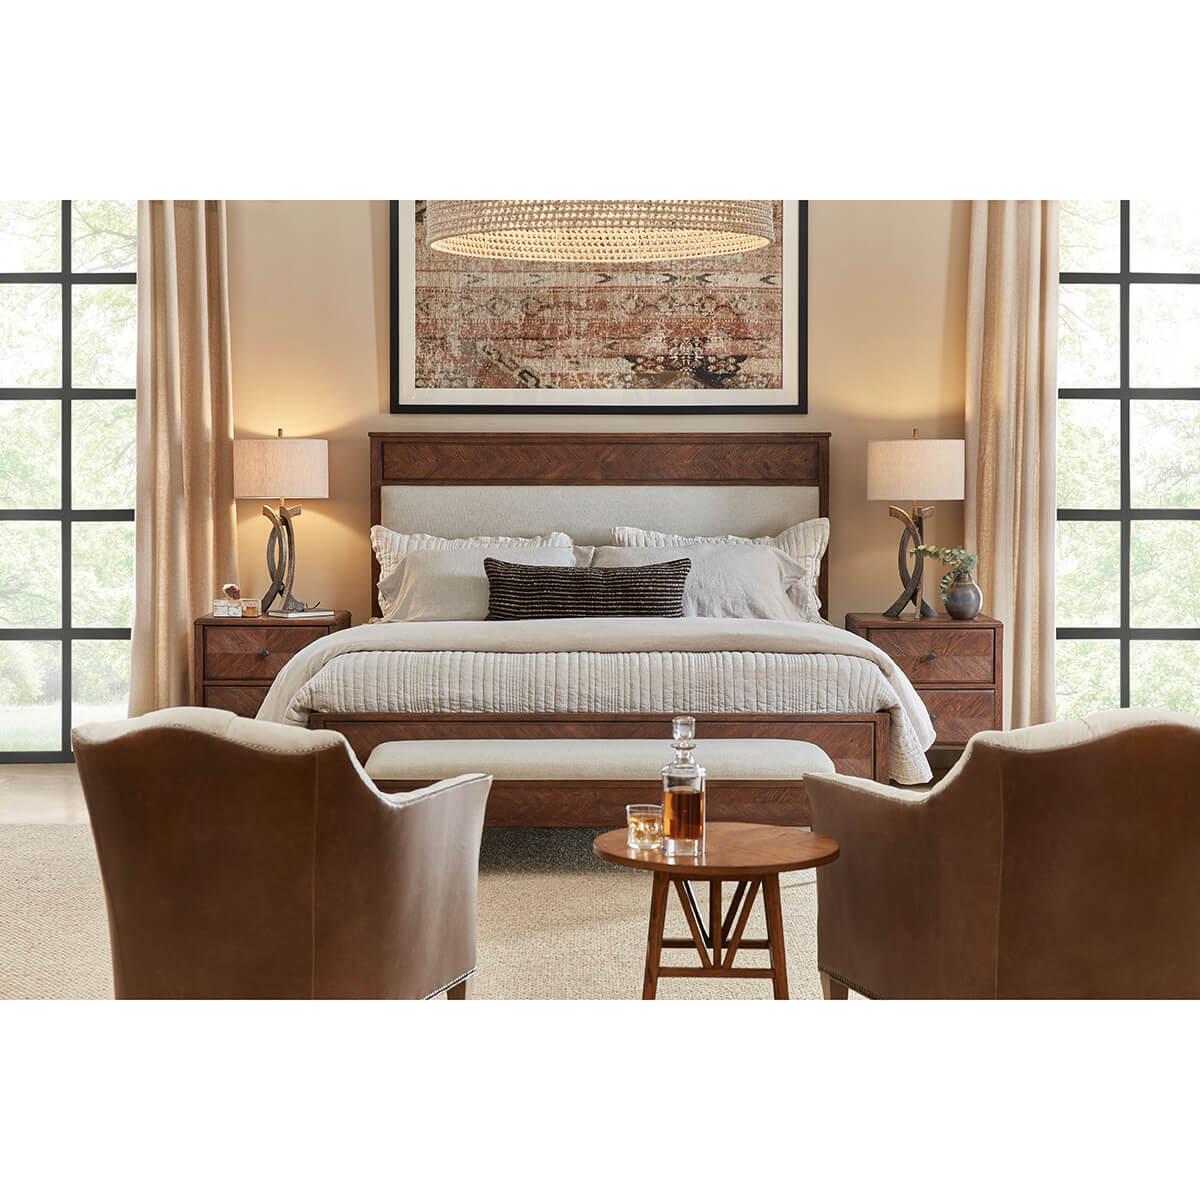 Crafted from rustic oak. This beautiful bed has a hand-carved starburst design. It has a classic silhouette with an upholstered panel headboard with a framed oak side rail and tapered finish leg. 
Shown in Dusk Finish
Shown in Linen-UP5409